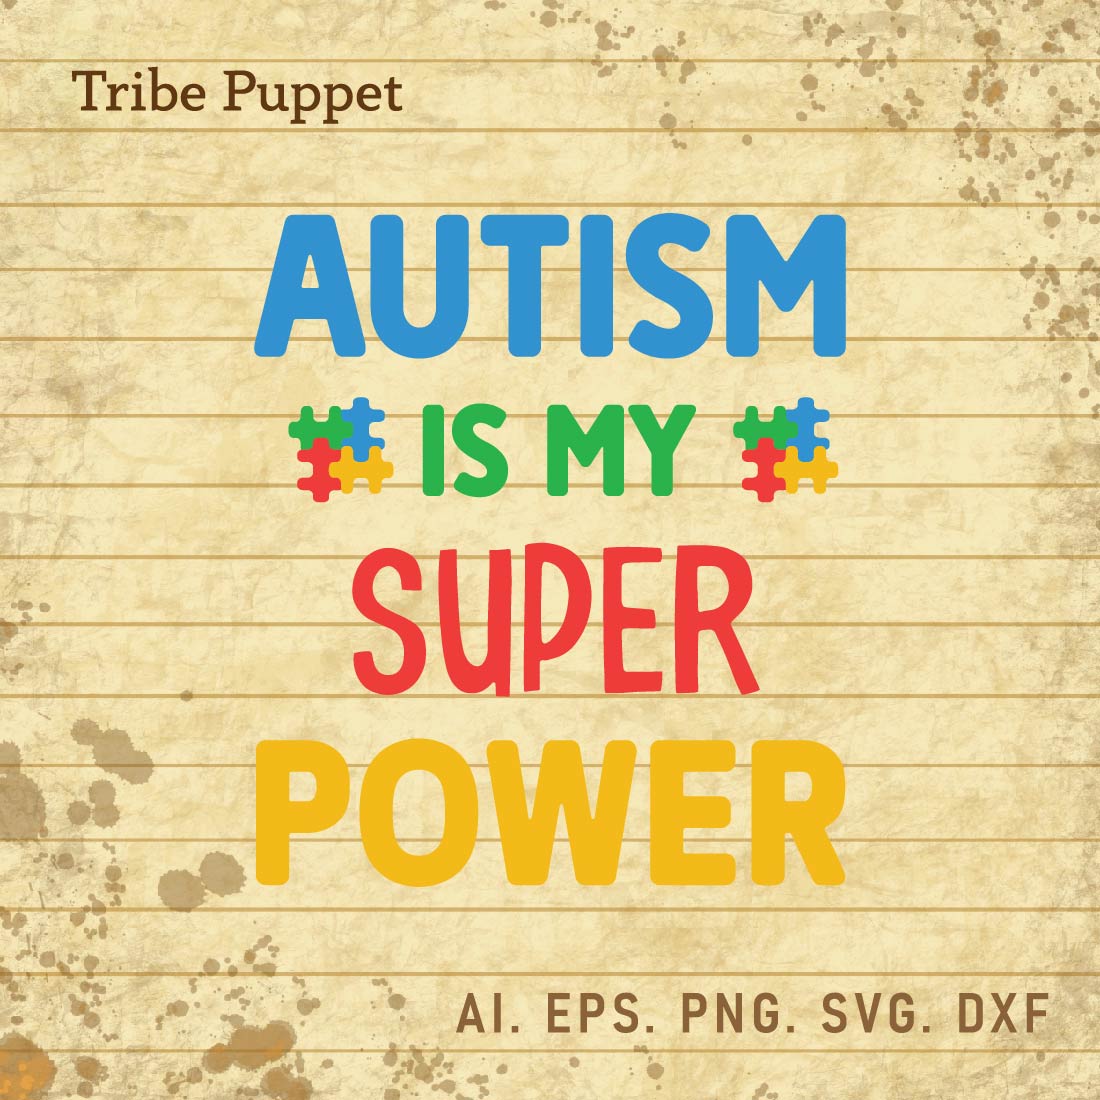 Autism Quotes cover image.